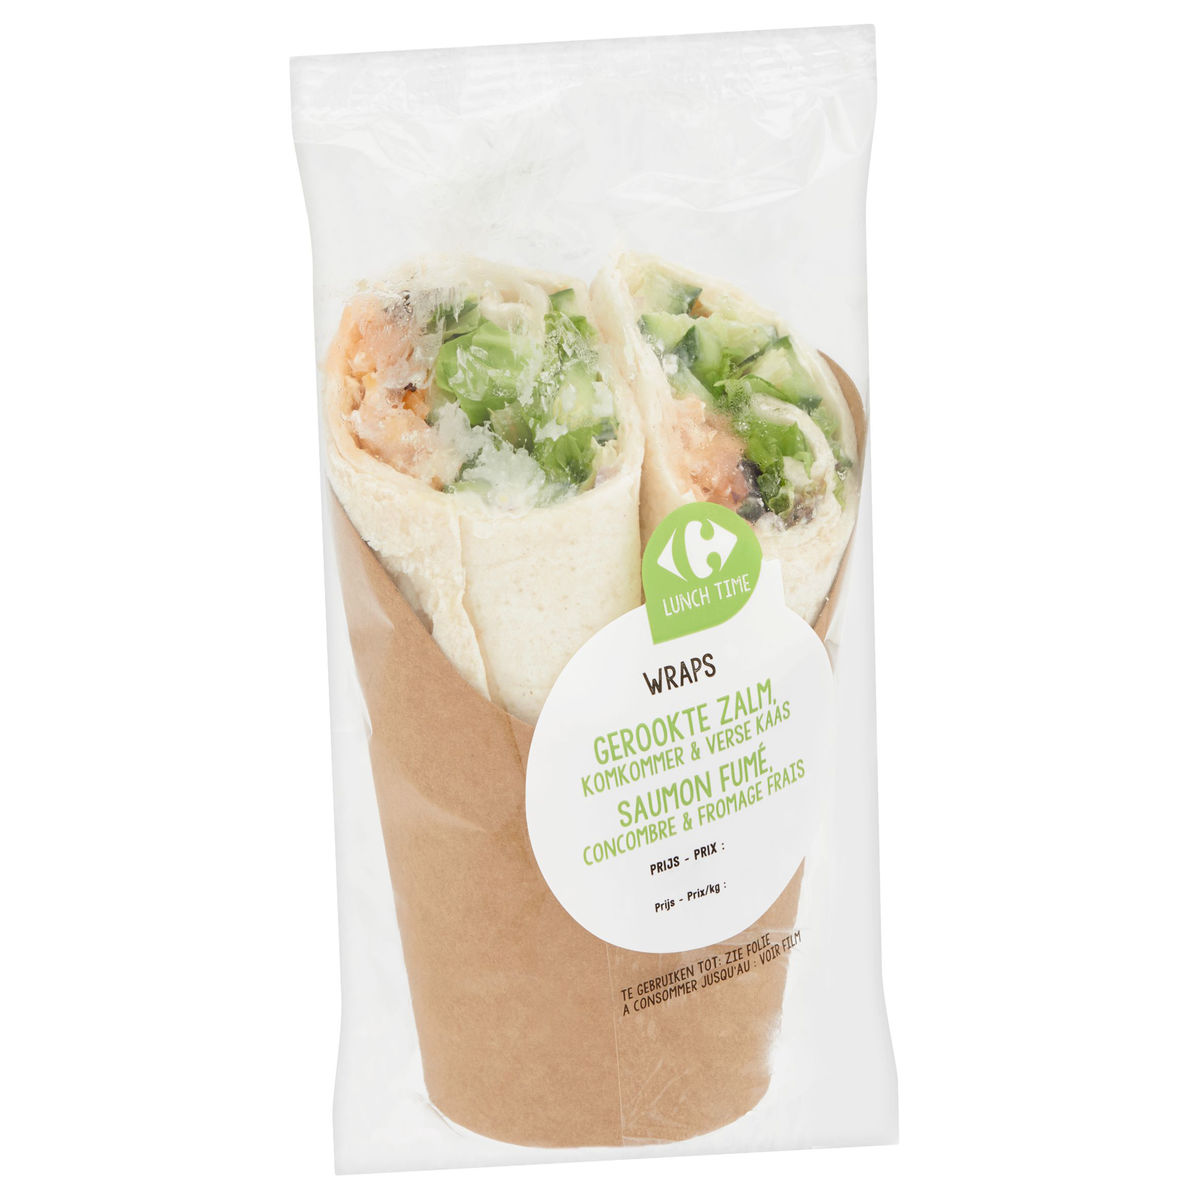 Carrefour Lunch Time Wraps Gerookte Zalm, Komkommer & Verse Kaas 210 g